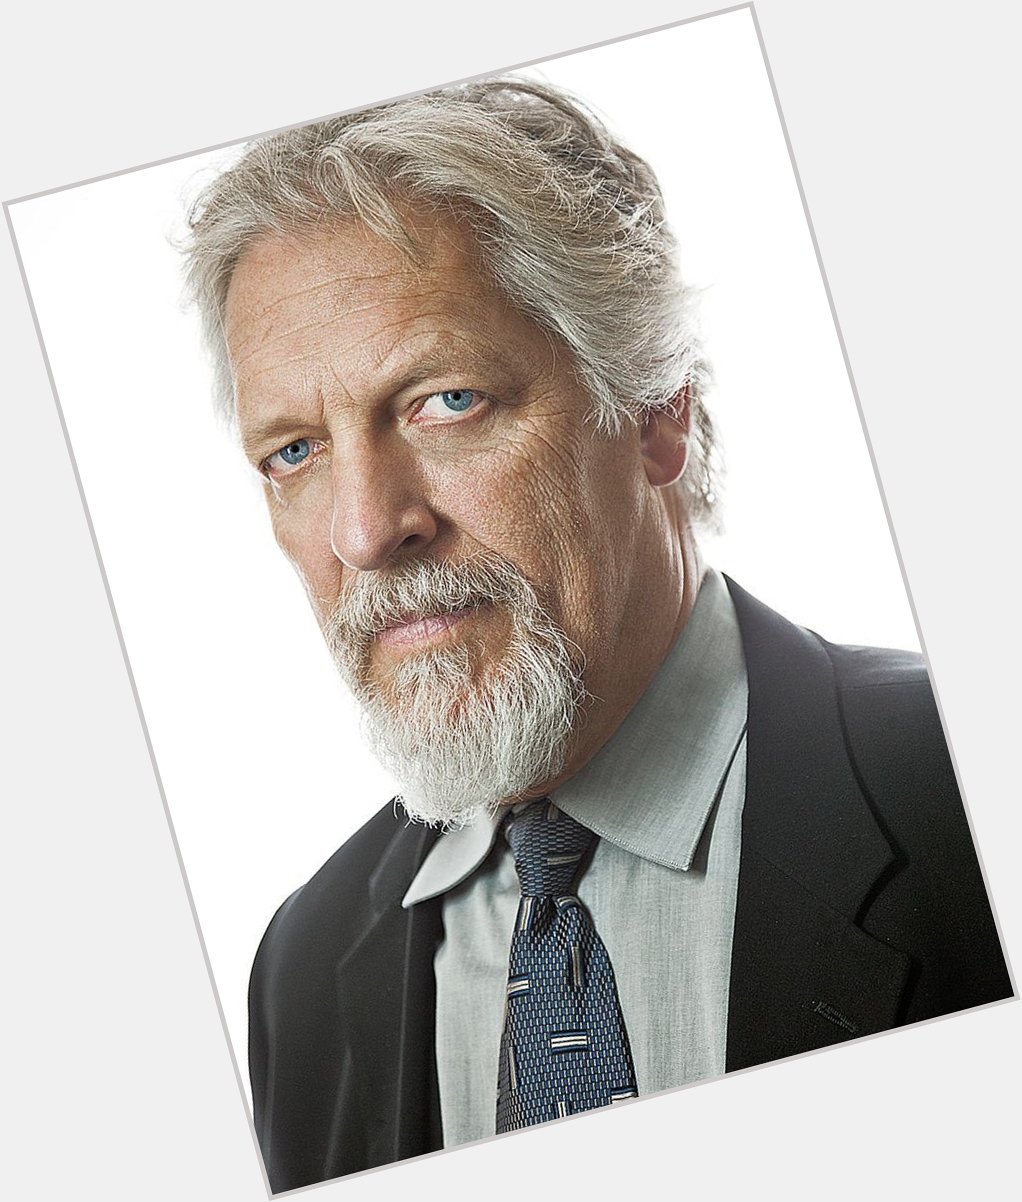 Happy Birthday to Clancy Brown who turns 61 today! 